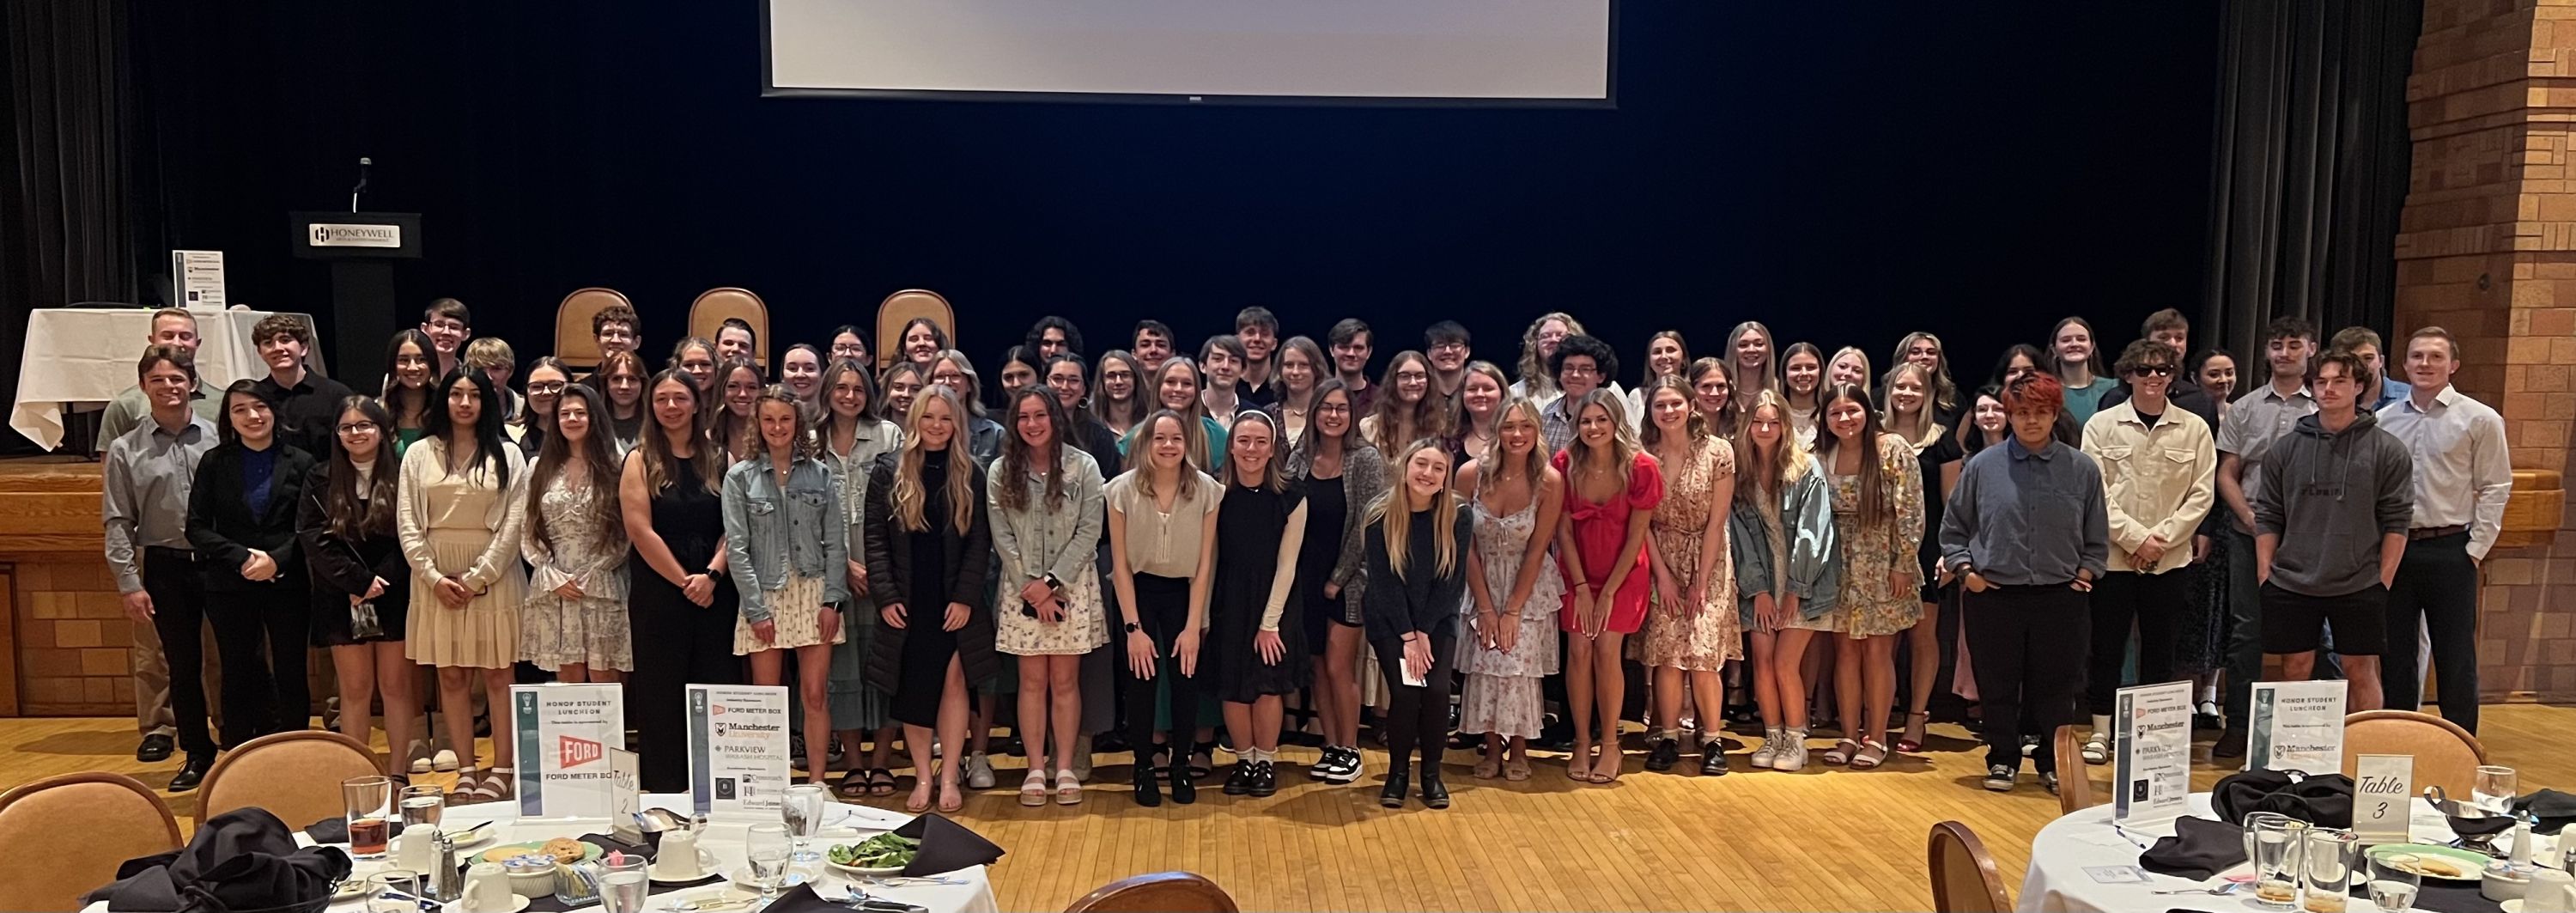 Wabash County community connects, empowers top local students Photo